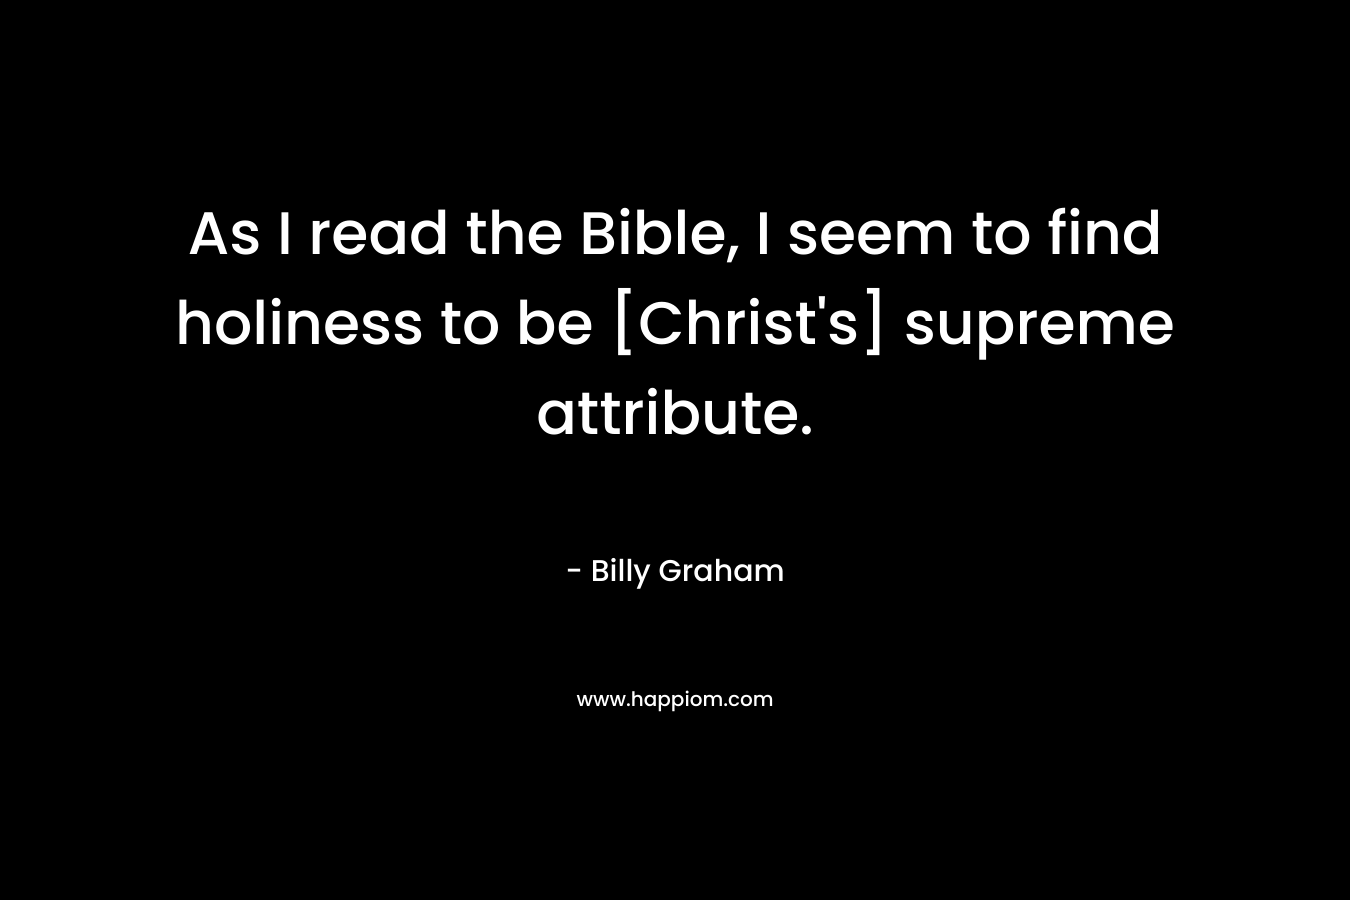 As I read the Bible, I seem to find holiness to be [Christ’s] supreme attribute. – Billy Graham